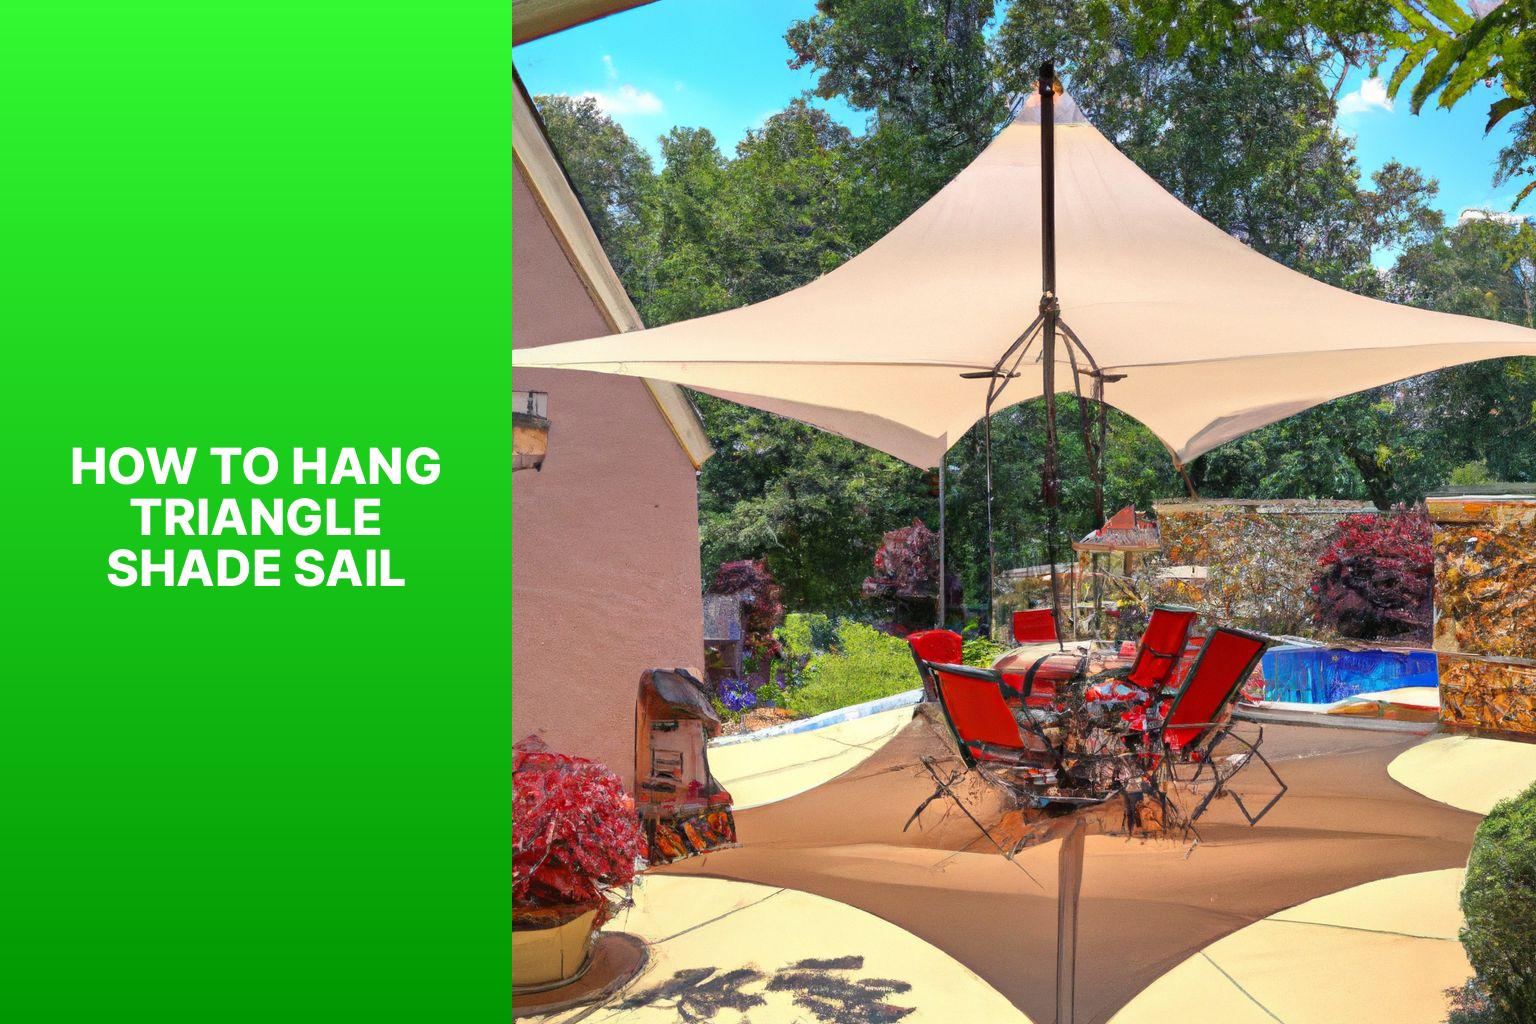 Step-by-Step Guide: How to Hang a Triangle Shade Sail Properly